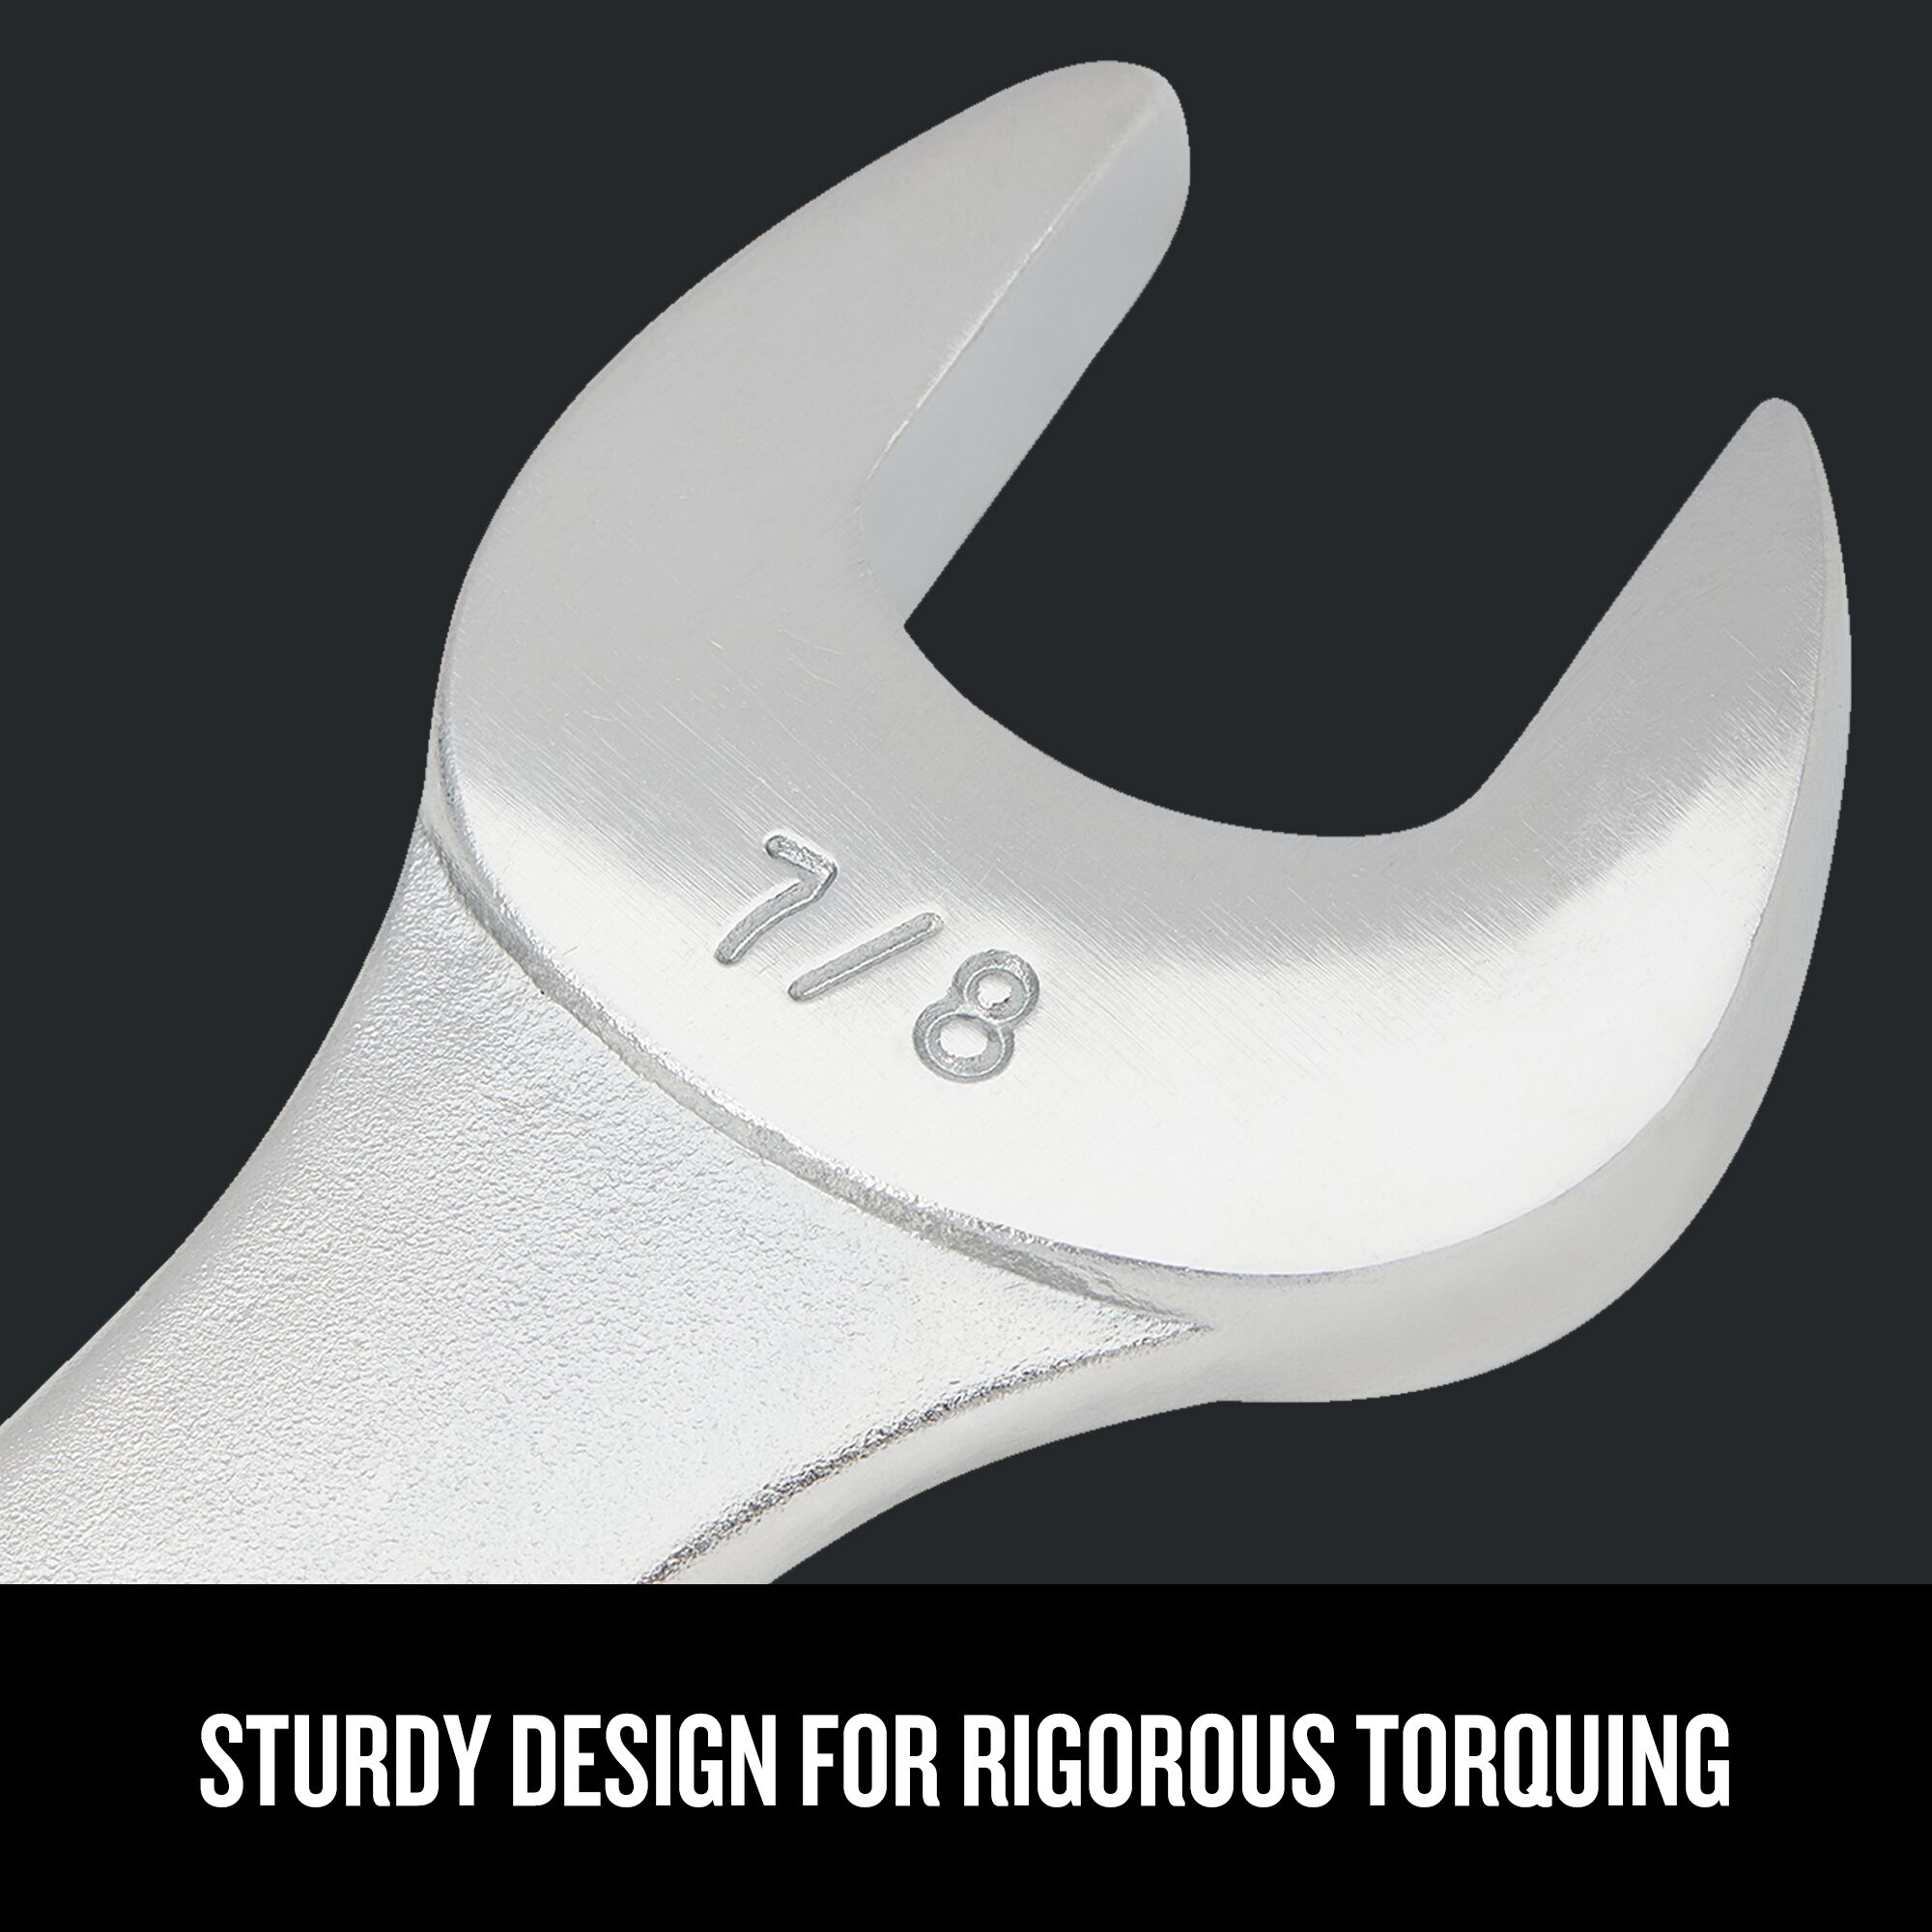 Close-up view of  a single Craftsman 12 pt. Wrench showing sturdy design for rigorous torquing.